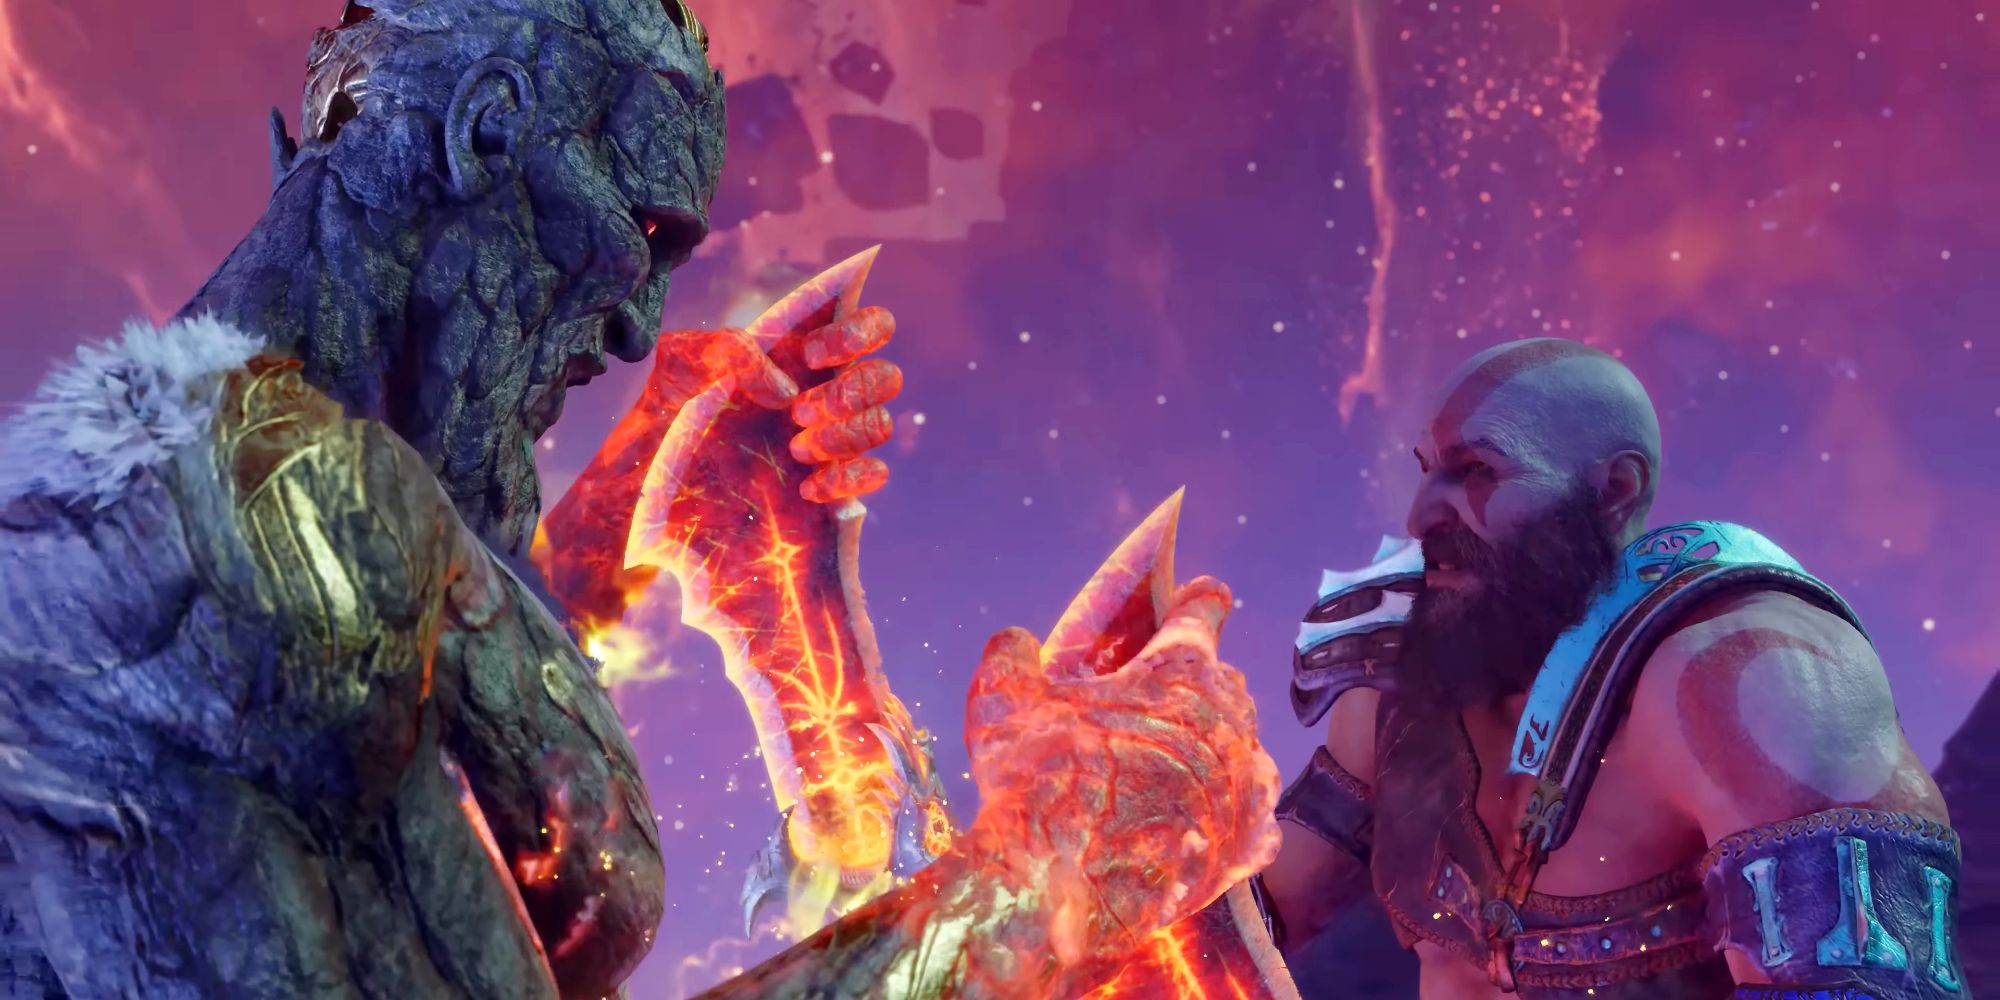 Surtr gripping the Blades of Chaos, with Kratos holding the handles.